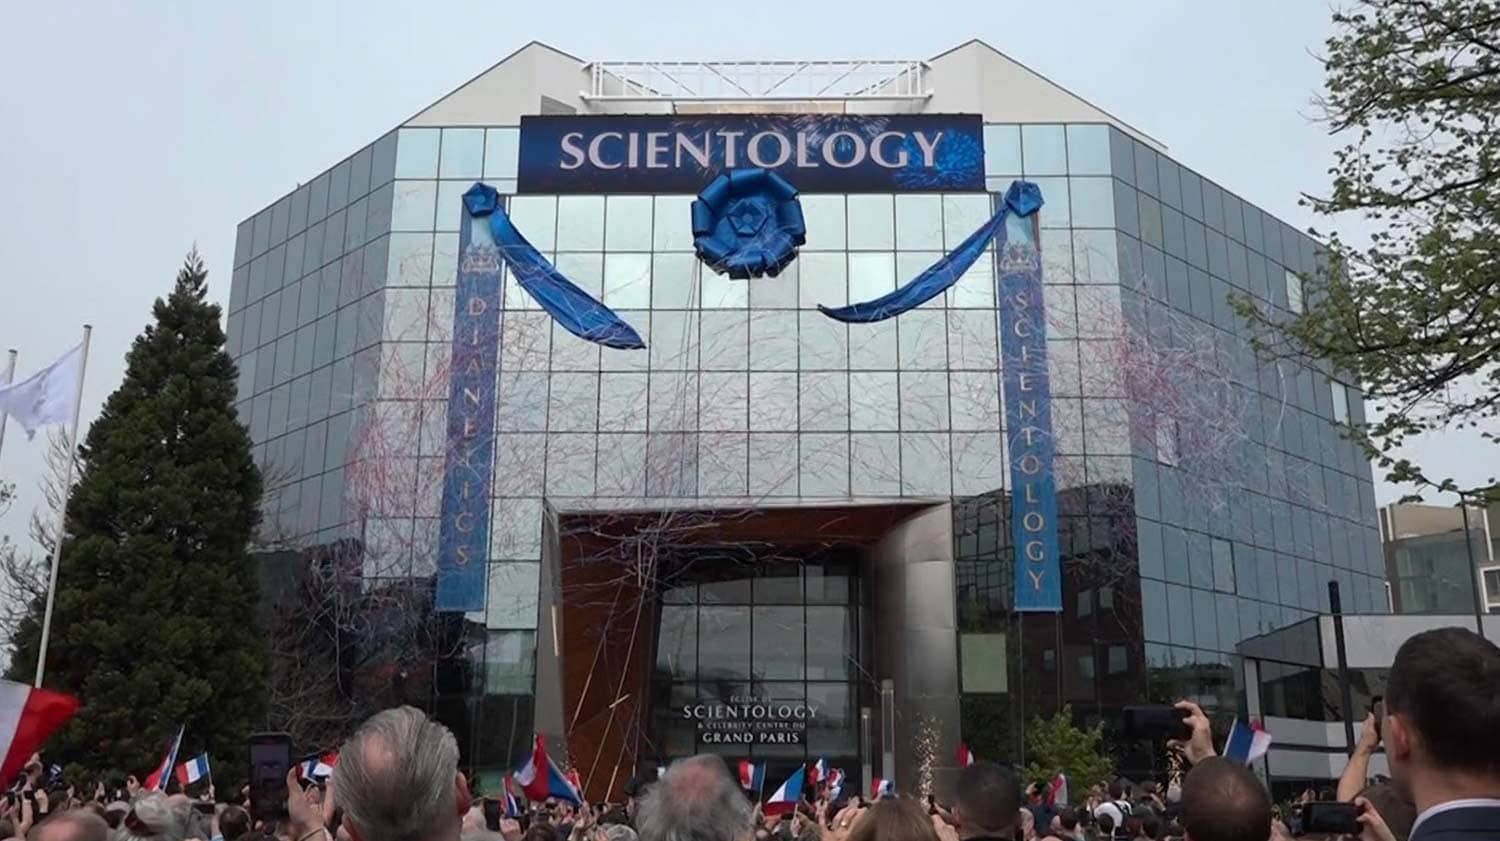 The Church of Scientology Paris grand opening